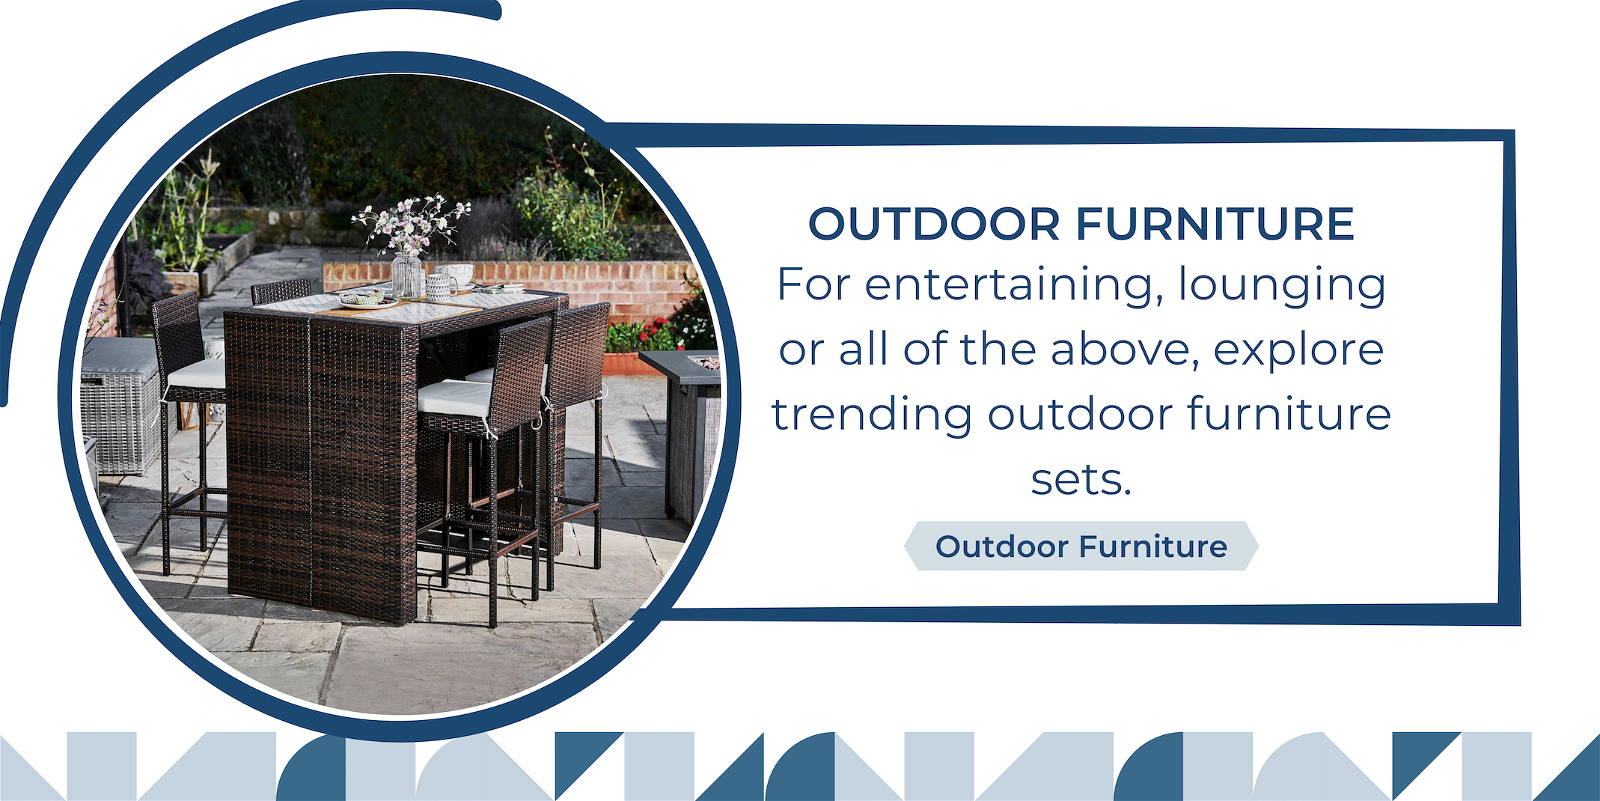 Outdoor Furniture: For entertaining, lounging or all of the above, explore trending outdoor furniture sets. A Wicker four seat patio table with matching chairs sit outside in the sun.